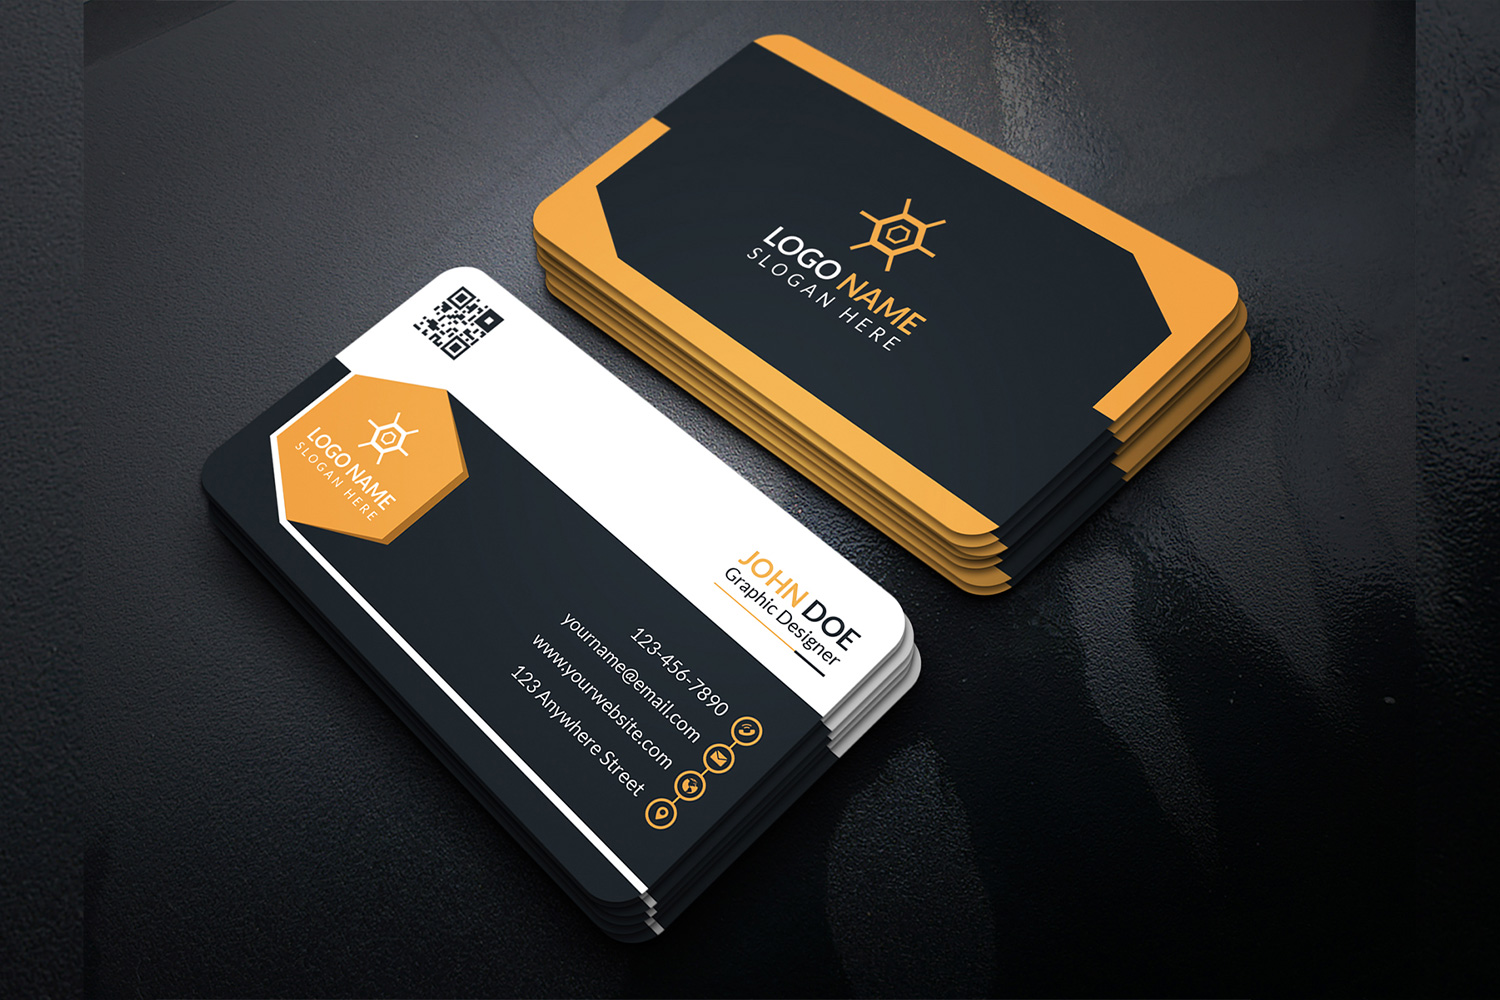 Stylish business cards in yellow and black colors.